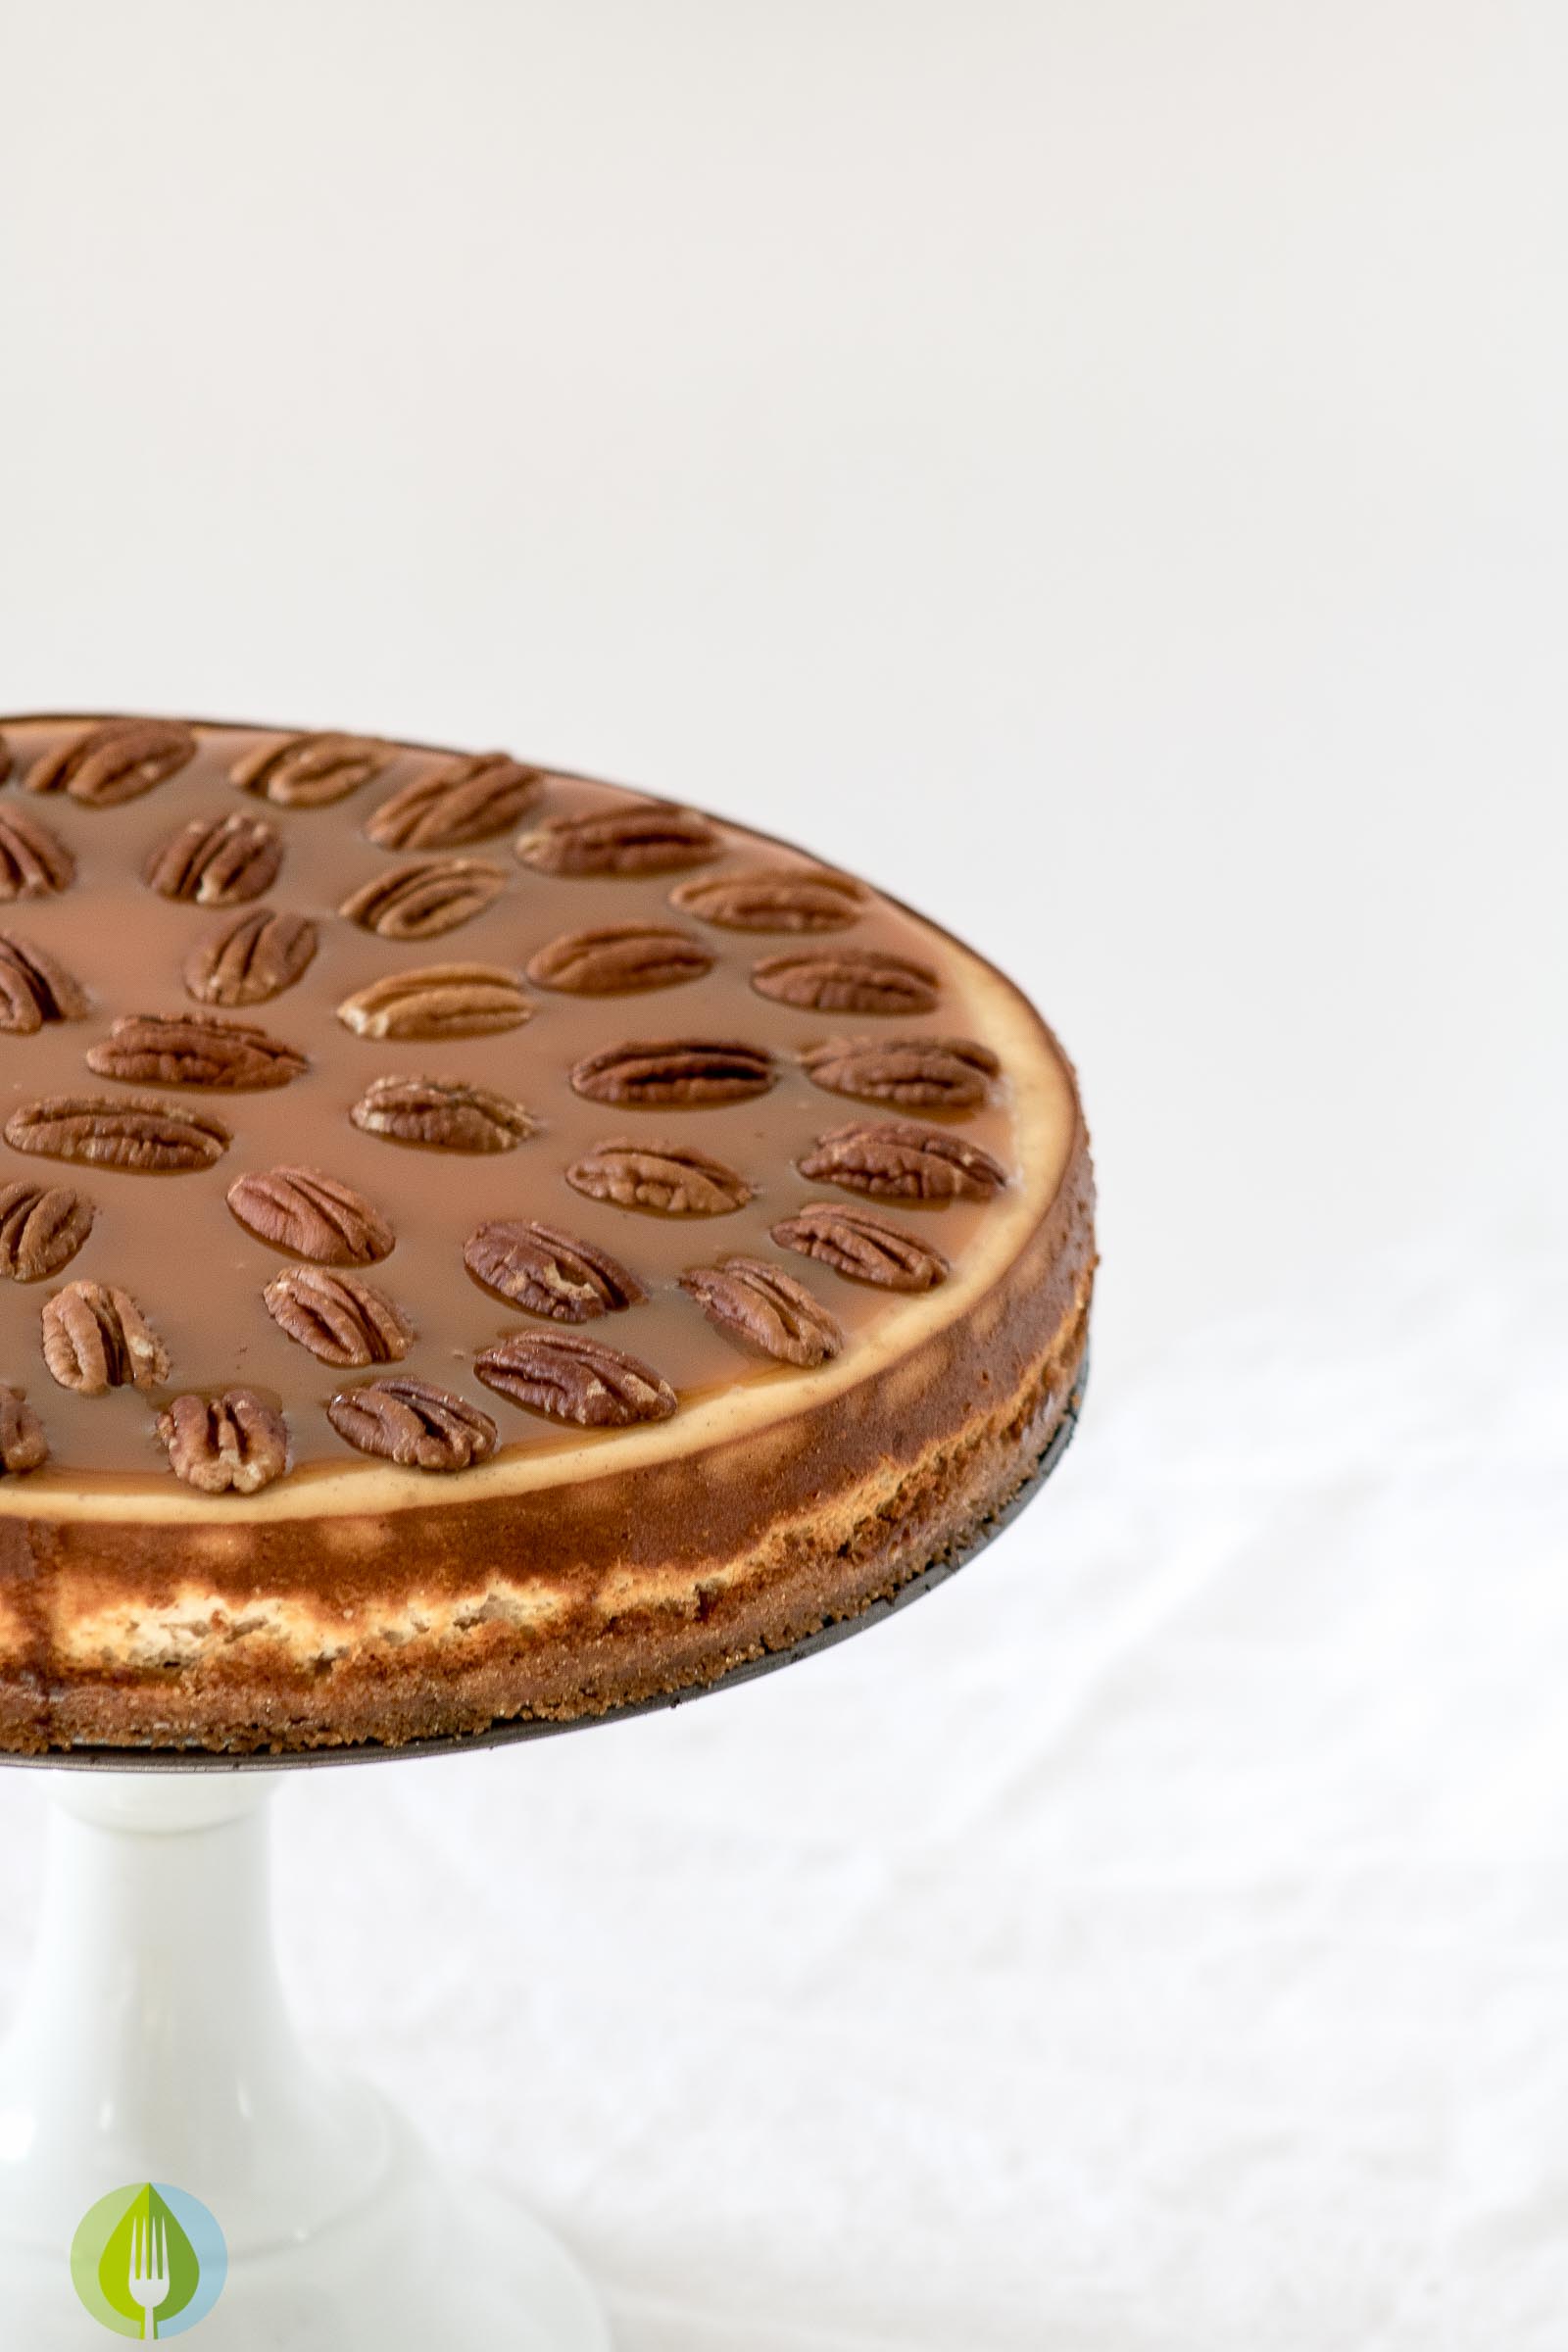 Canadian Whiskey cheesecake on a cake stand, cake is overed in pecans and caramel sauce